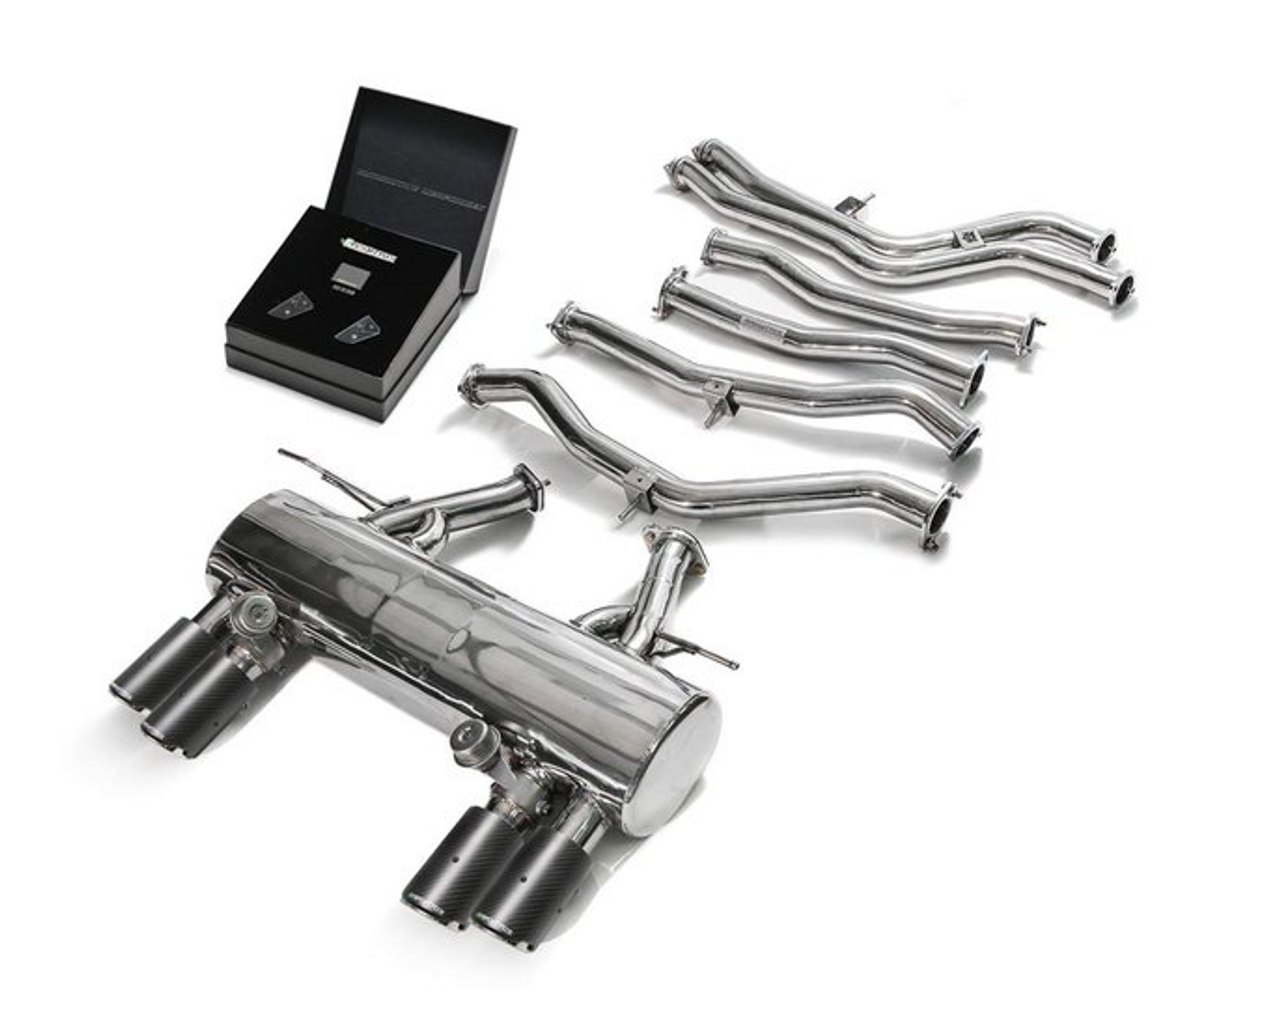 BMW Stainless Steel Valvetronic Catback Exhaust System with Quad Carbon Fiber Tips - Armytrix BMF8M-QC11